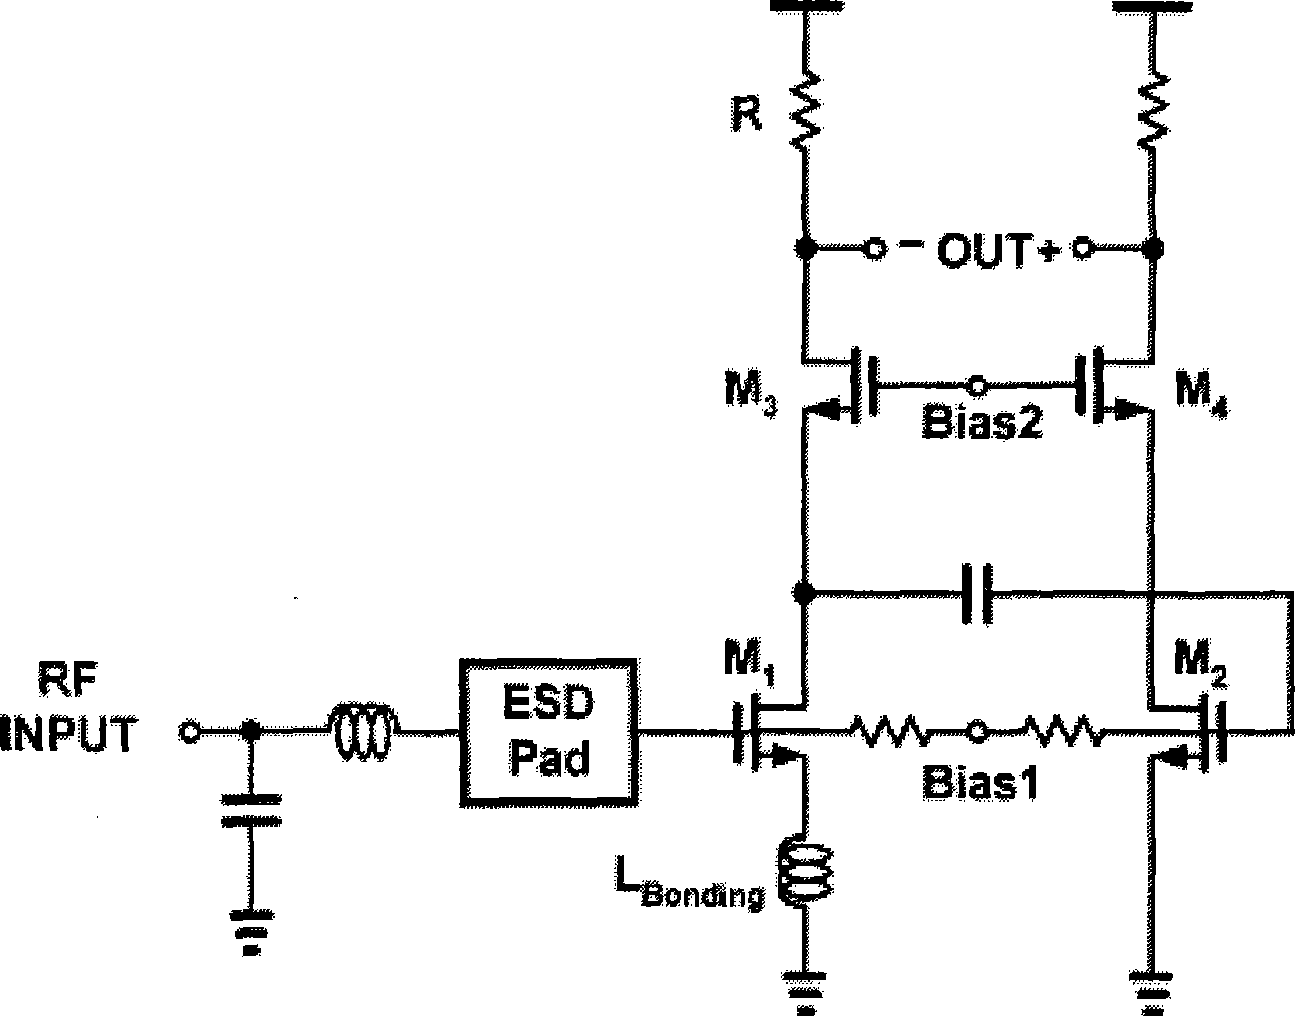 Low-power consumption single-ended input difference output low-noise amplifier